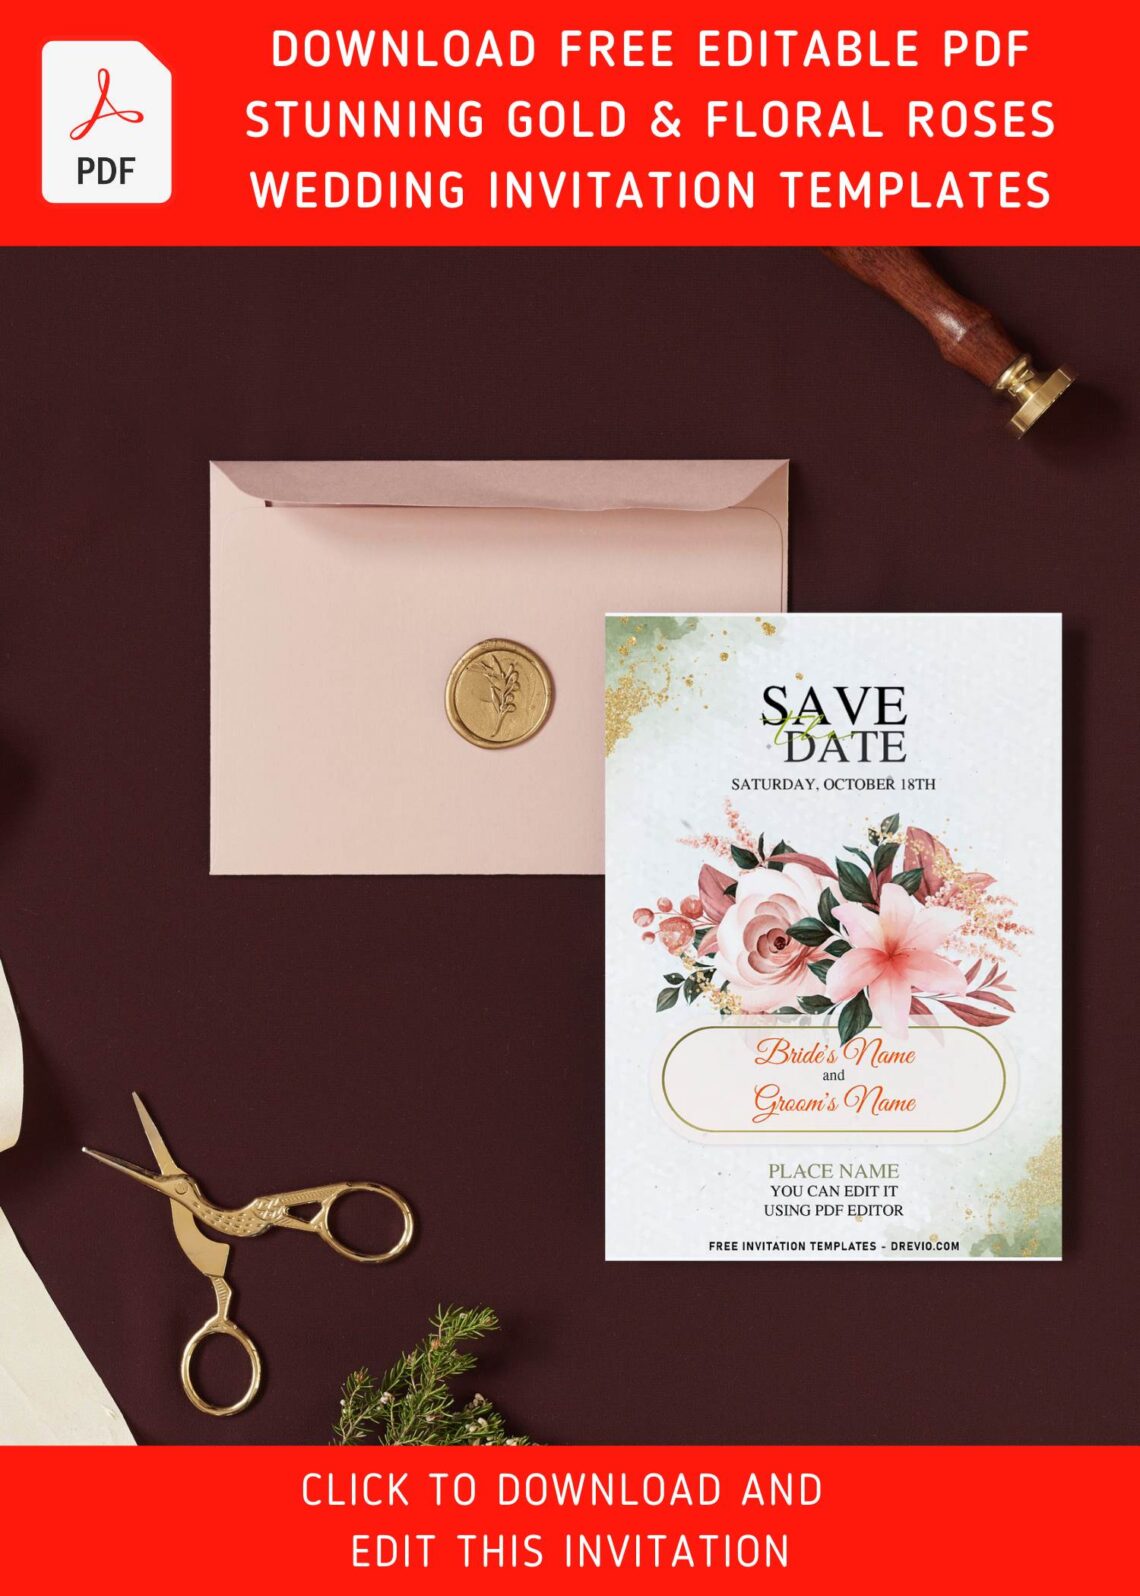 (Free Editable PDF) Striking Nature-Inspired Flower Wedding Invitation Templates with watercolor garden roses